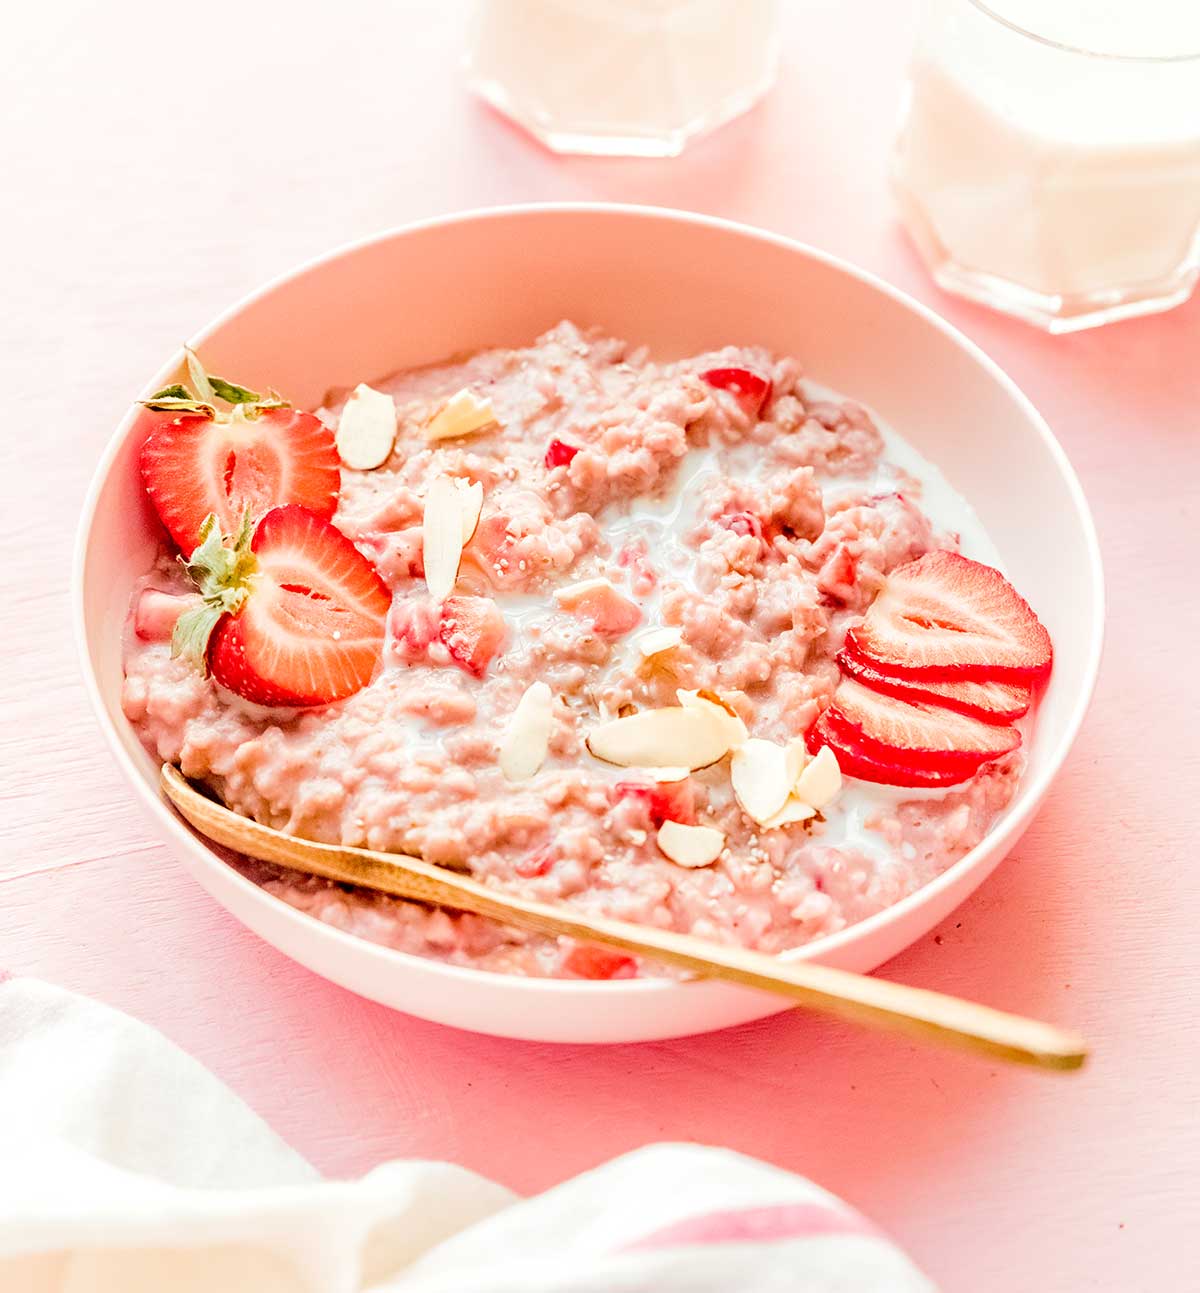 A bowl of strawberry oats topped with strawberry slices and halves and almond slivers